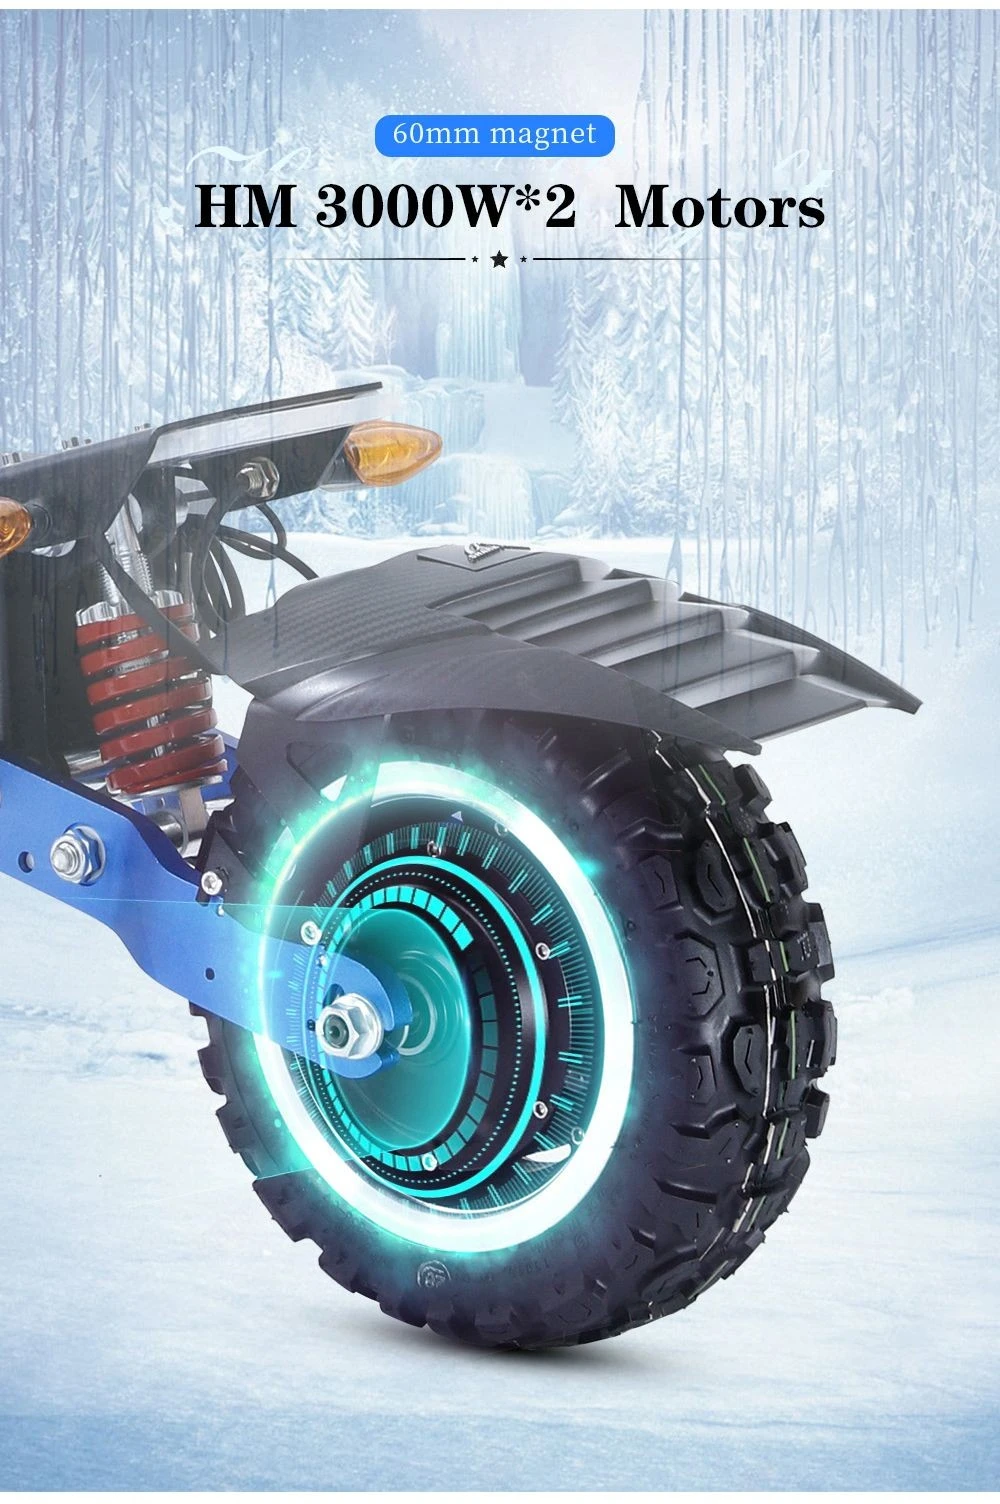 https://img.gkbcdn.com/d/202303/Halo-Knight-T108-Pro-Electric-Scooter-11---Off-road-Tire-519912-6._p1_.jpg